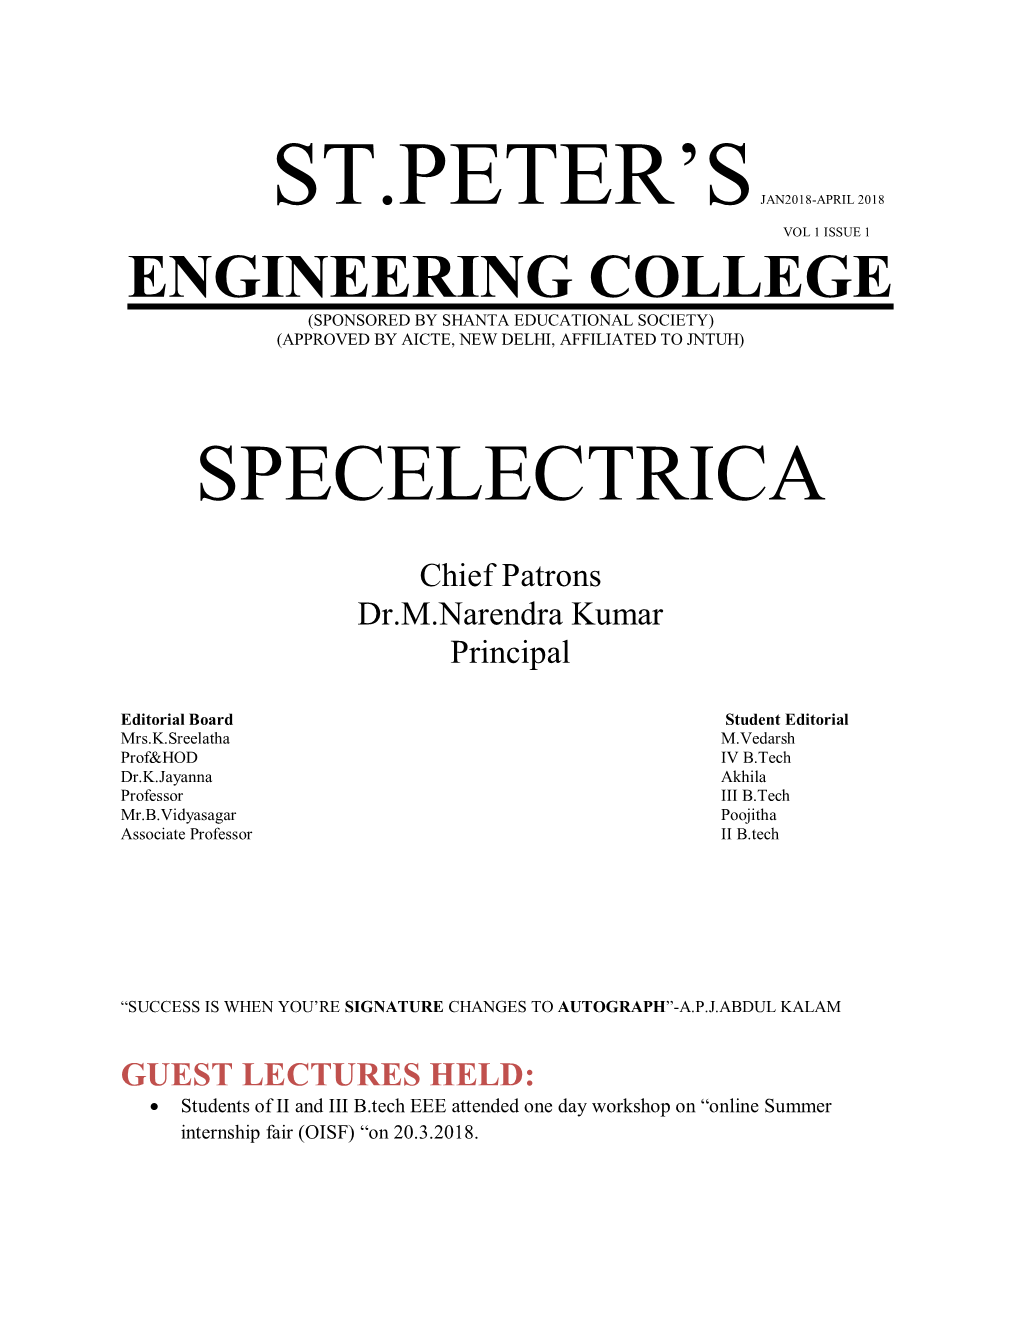 Electrical and Electronics Engineering 2017-18 Issue-2